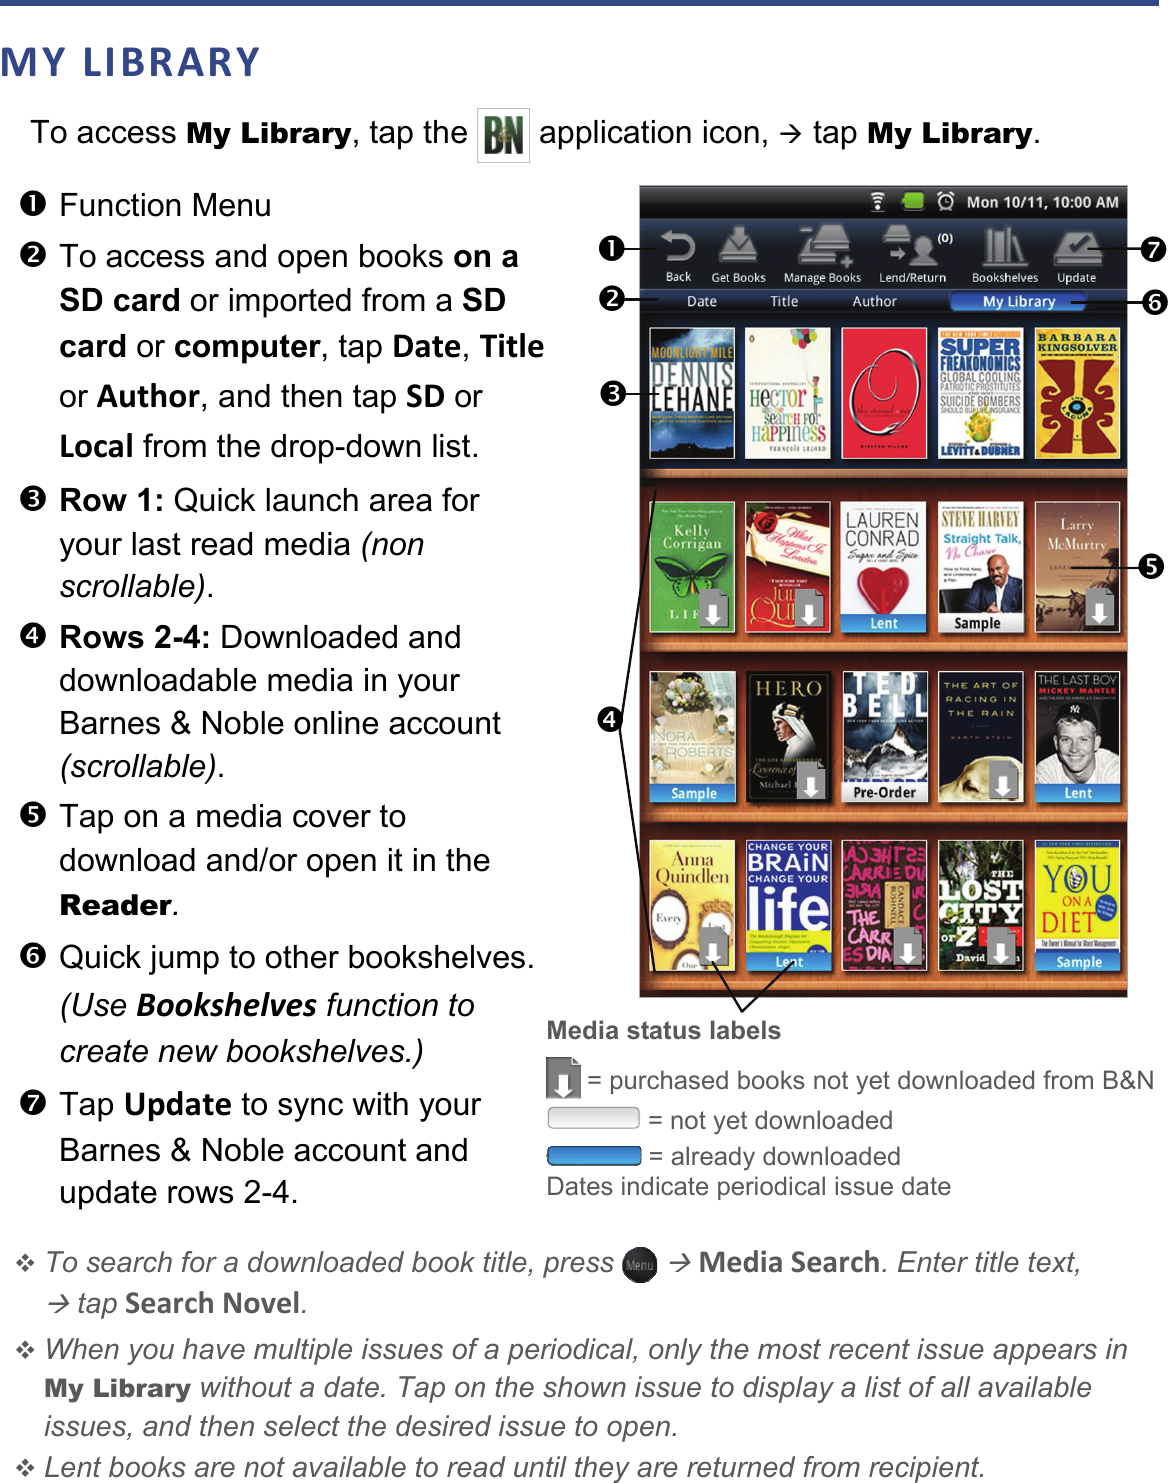  MY LIBRARY To access My Library, tap the   application icon,  tap My Library.   Function Menu  To access and open books on a SD card or imported from a SD card or computer, tap Date, Title or Author, and then tap SD or Local from the drop-down list.  Row 1: Quick launch area for your last read media (non scrollable).  Rows 2-4: Downloaded and downloadable media in your Barnes &amp; Noble online account (scrollable).  Tap on a media cover to download and/or open it in the Reader.  Quick jump to other bookshelves. (Use Bookshelves function to create new bookshelves.)  Tap Update to sync with your Barnes &amp; Noble account and update rows 2-4.  To search for a downloaded book title, press    Media Search. Enter title text,  tap Search Novel.  When you have multiple issues of a periodical, only the most recent issue appears in My Library without a date. Tap on the shown issue to display a list of all available issues, and then select the desired issue to open.  Lent books are not available to read until they are returned from recipient. Media status labels  = purchased books not yet downloaded from B&amp;N  = not yet downloaded  = already downloaded Dates indicate periodical issue date 